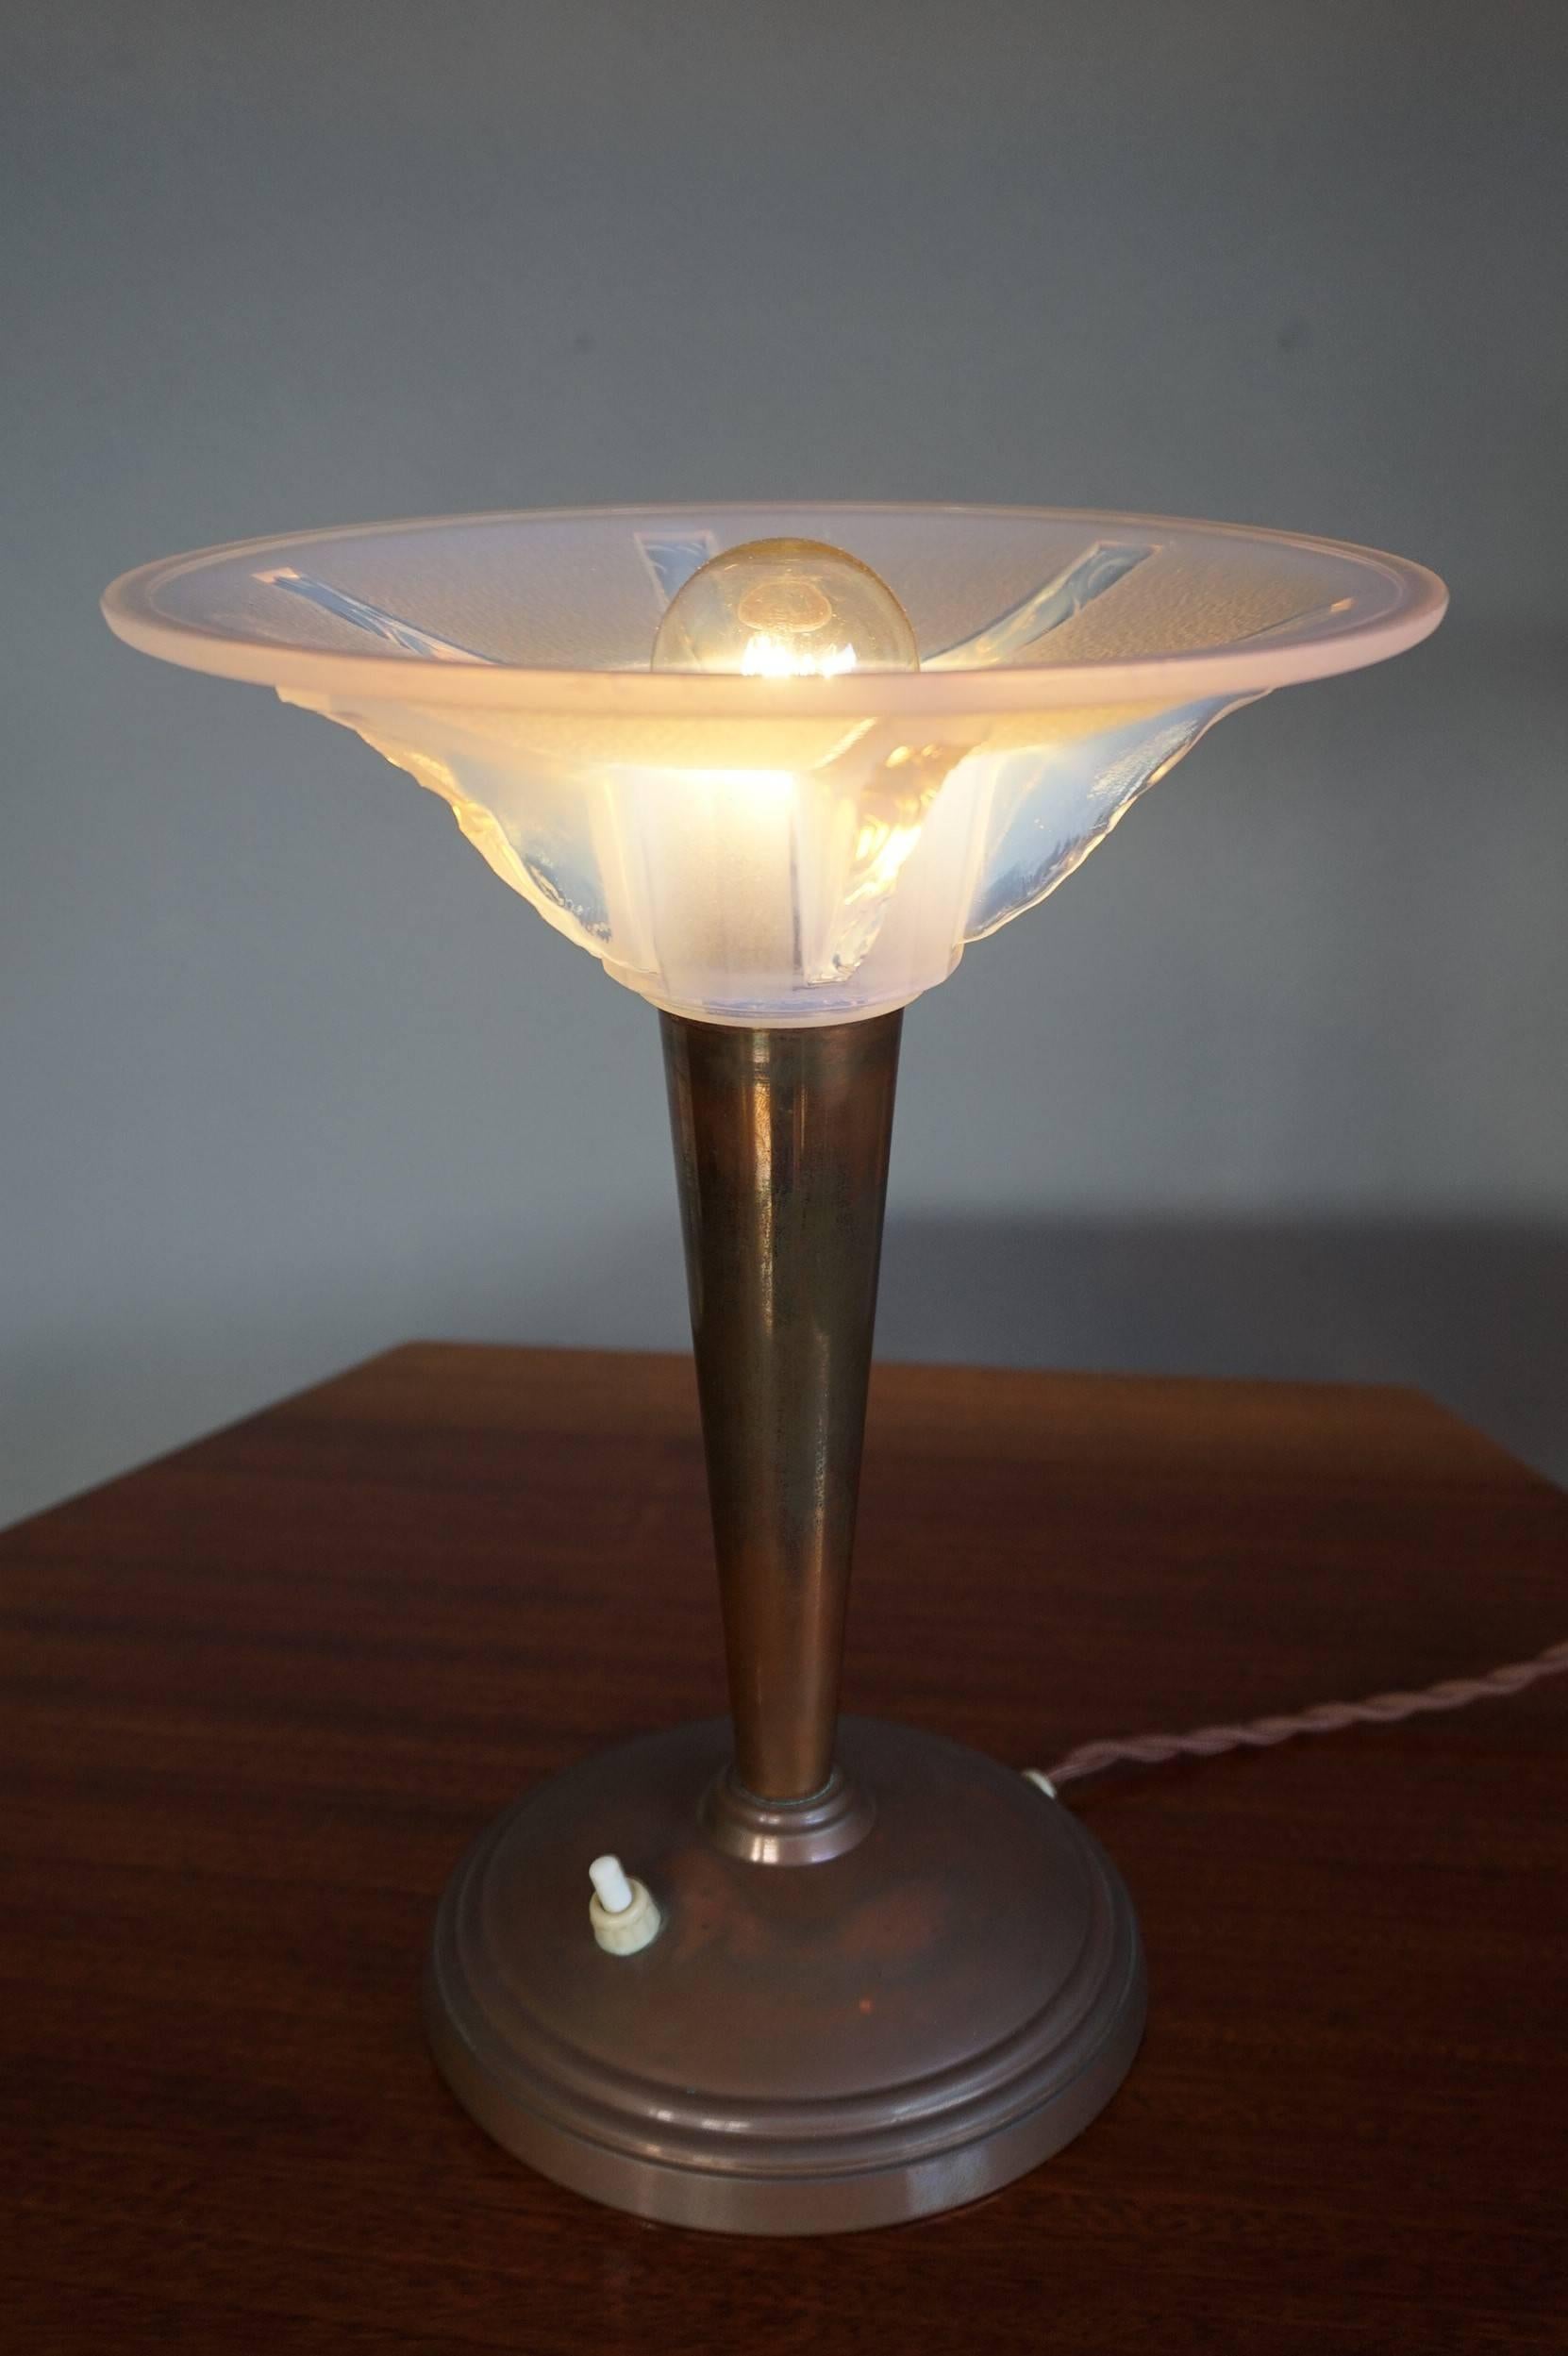 20th Century Art Deco Table or Desk Lamp with a Lalique Style Iridescent Blue Glass Shade